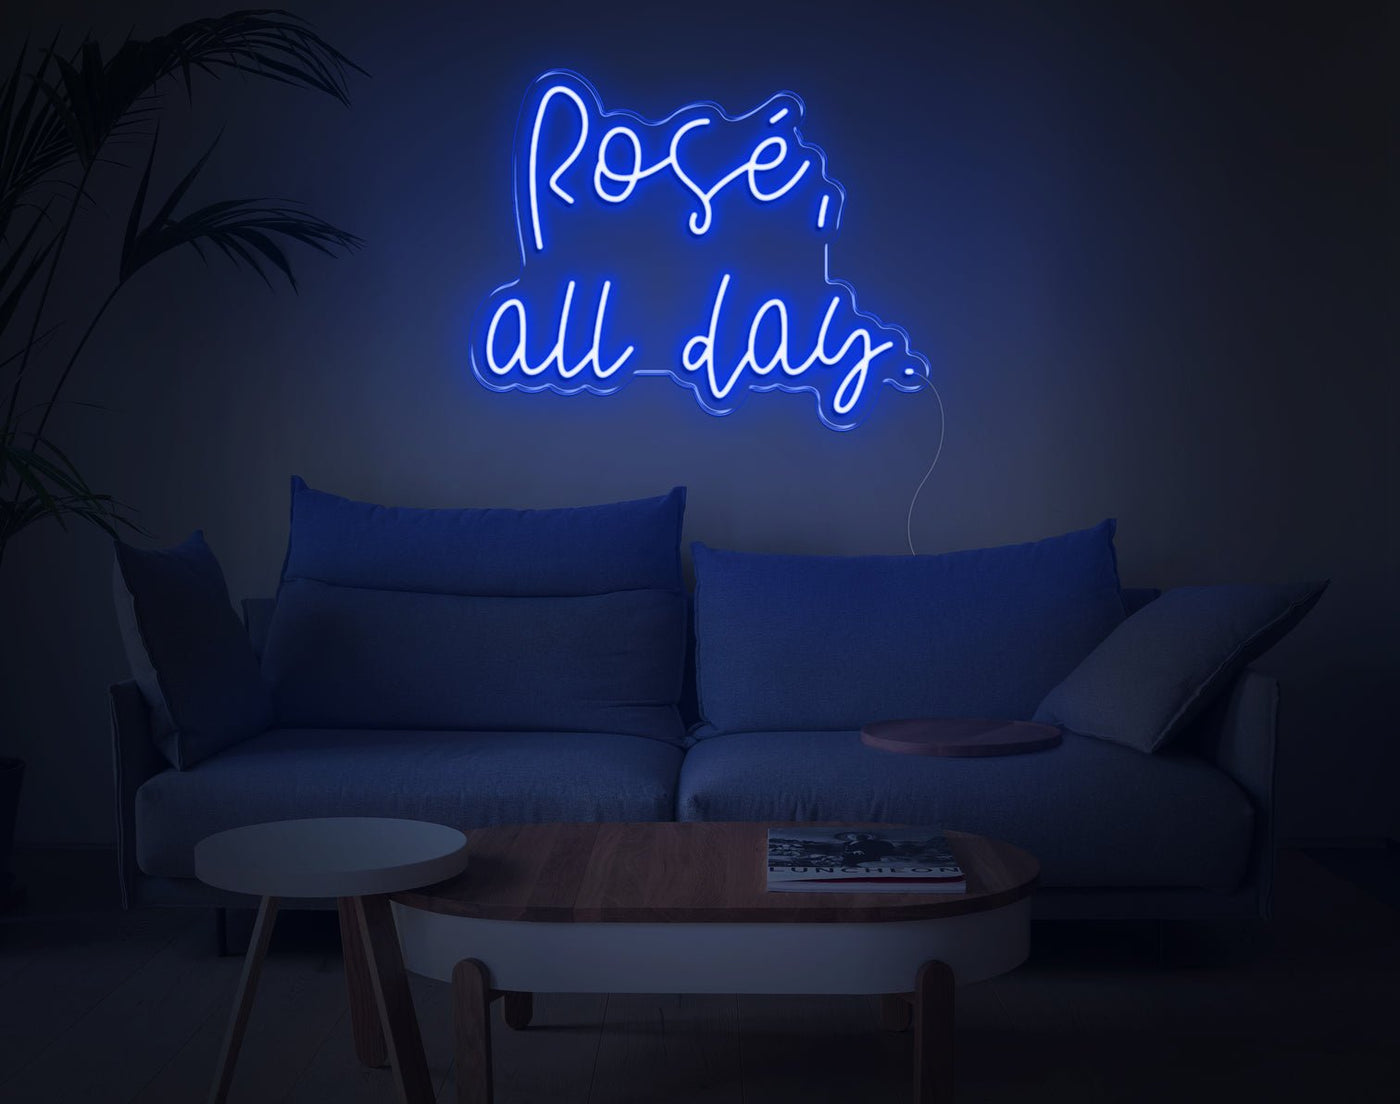 Rose All Day LED Neon Sign - 17inch x 22inchBlue